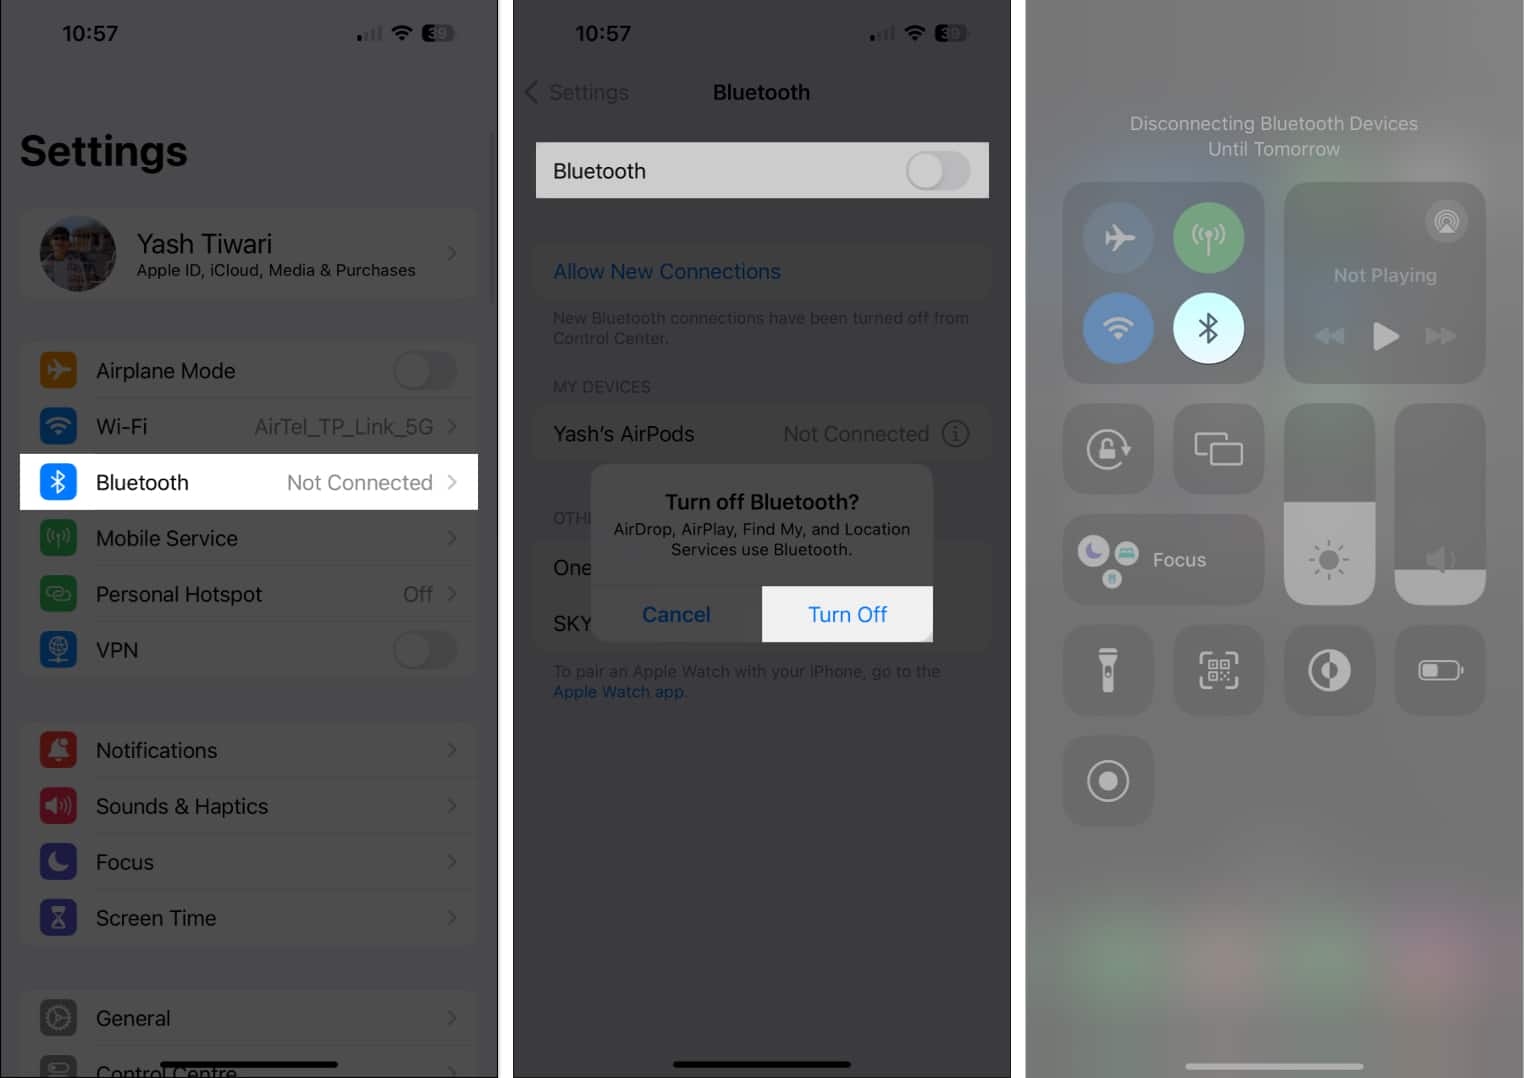 Turn off Bluetooth from Control Centre